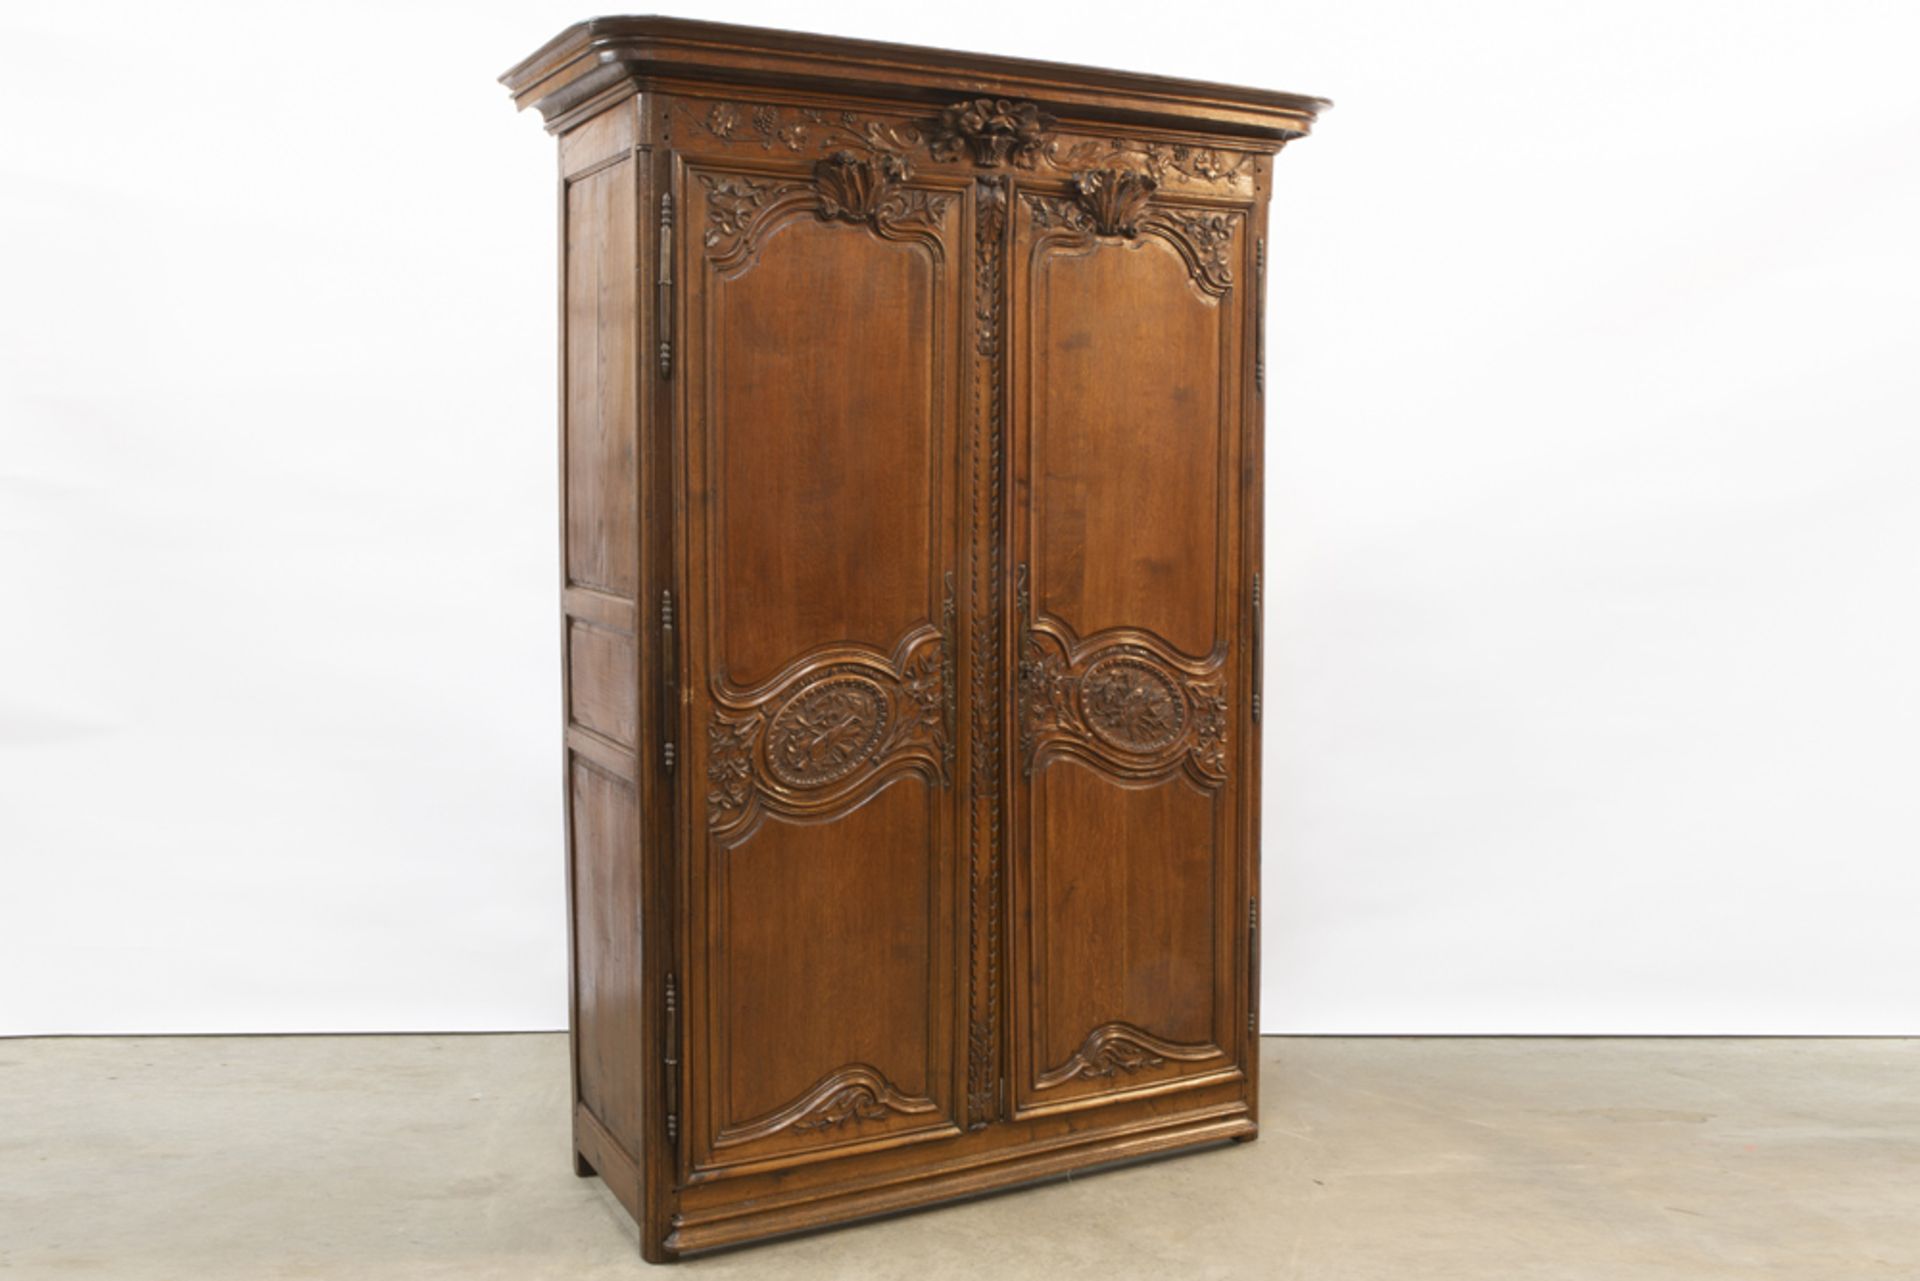 antique French oak armoire from Normandy with typical carvings || Antieke Normandische bruidskast in